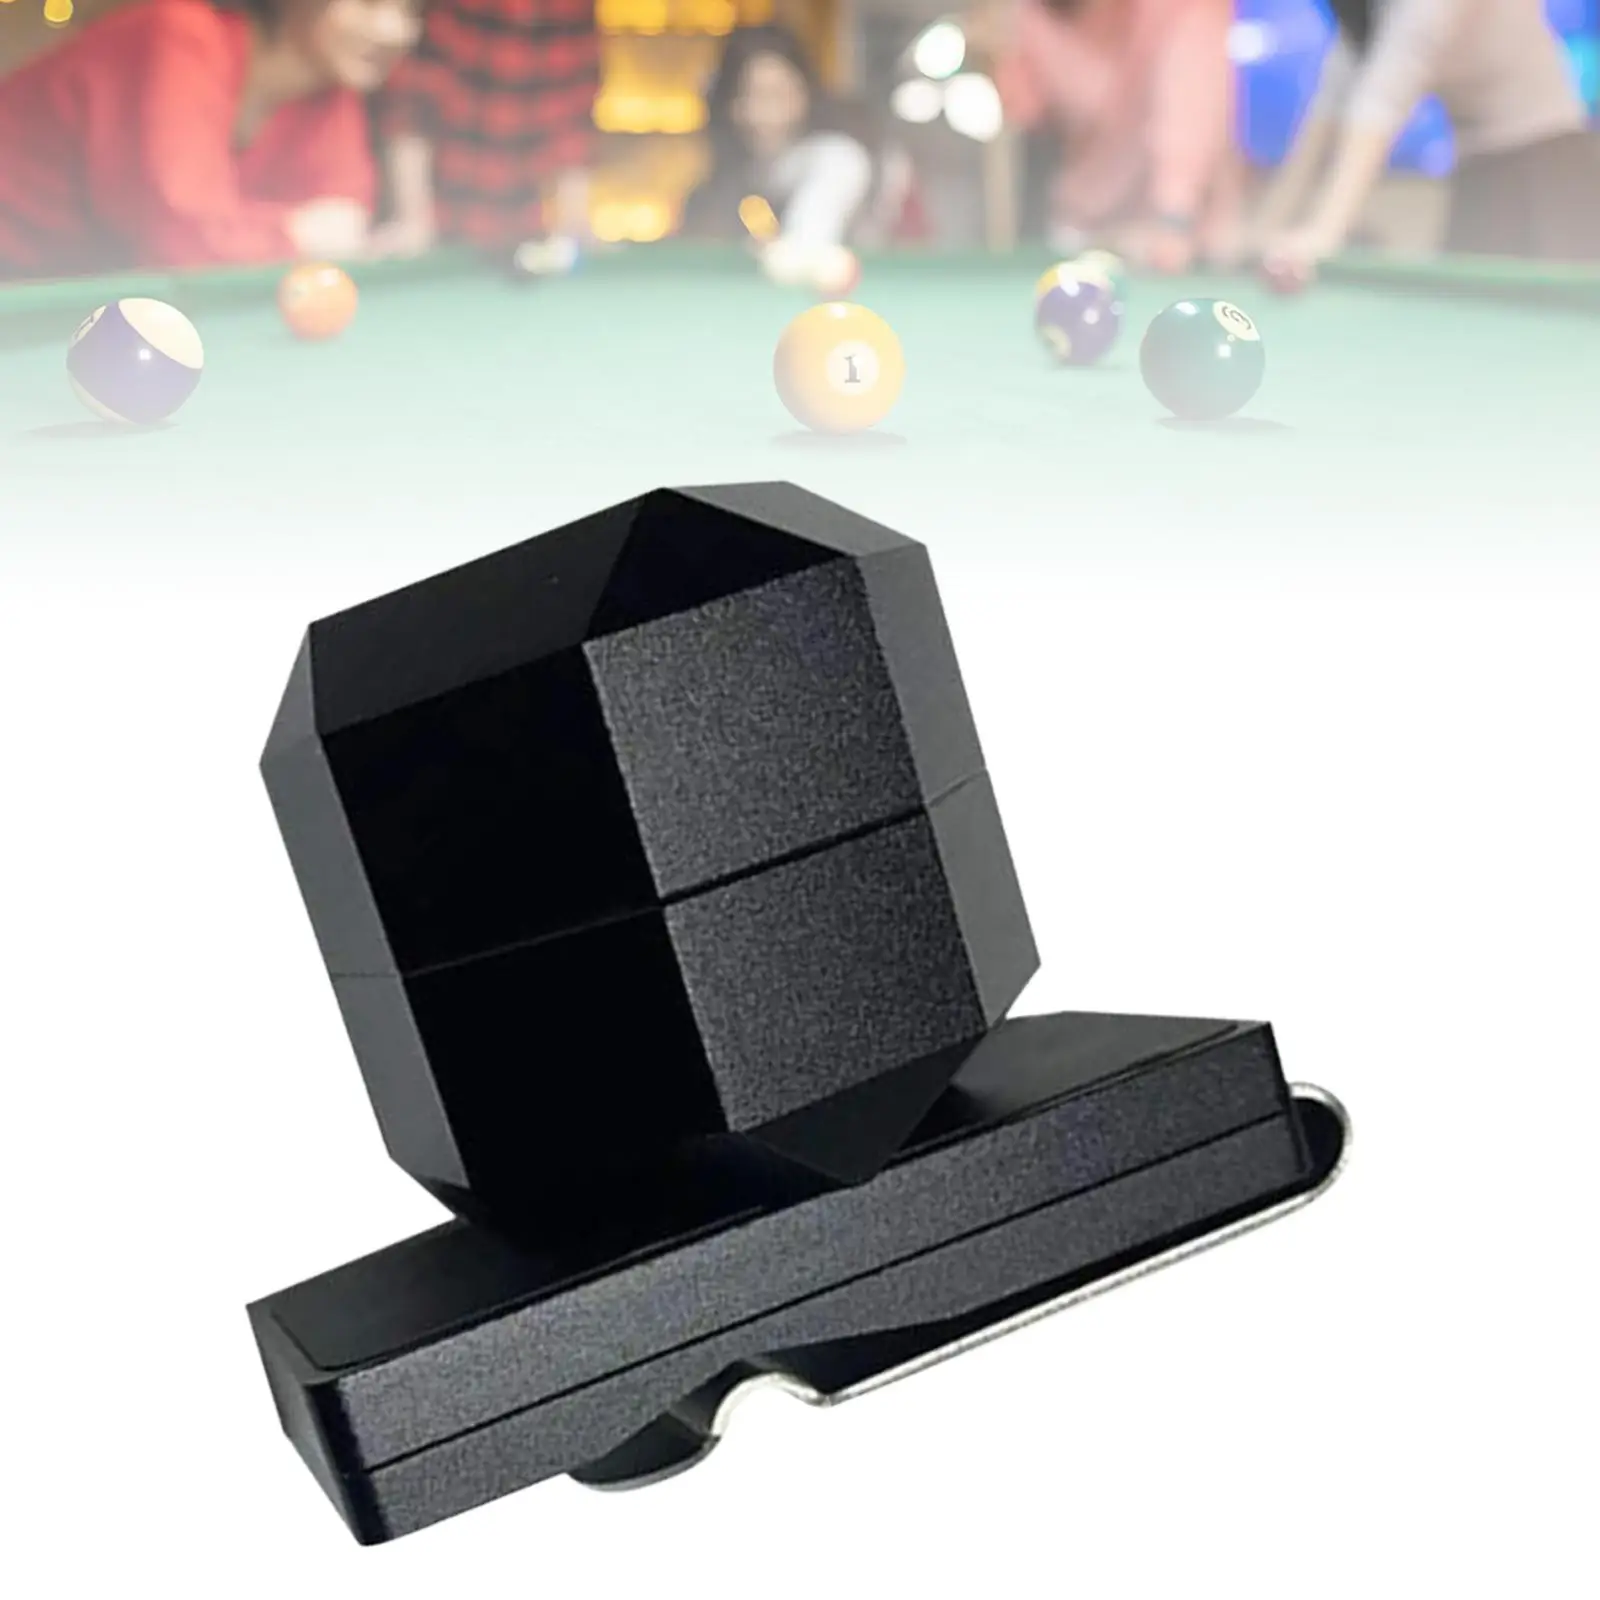 Mini Billiard Chalk Holder, with Belt Clip Practical Tool Supplies Cup Accessories Box Container Aluminium for Replacement Cue